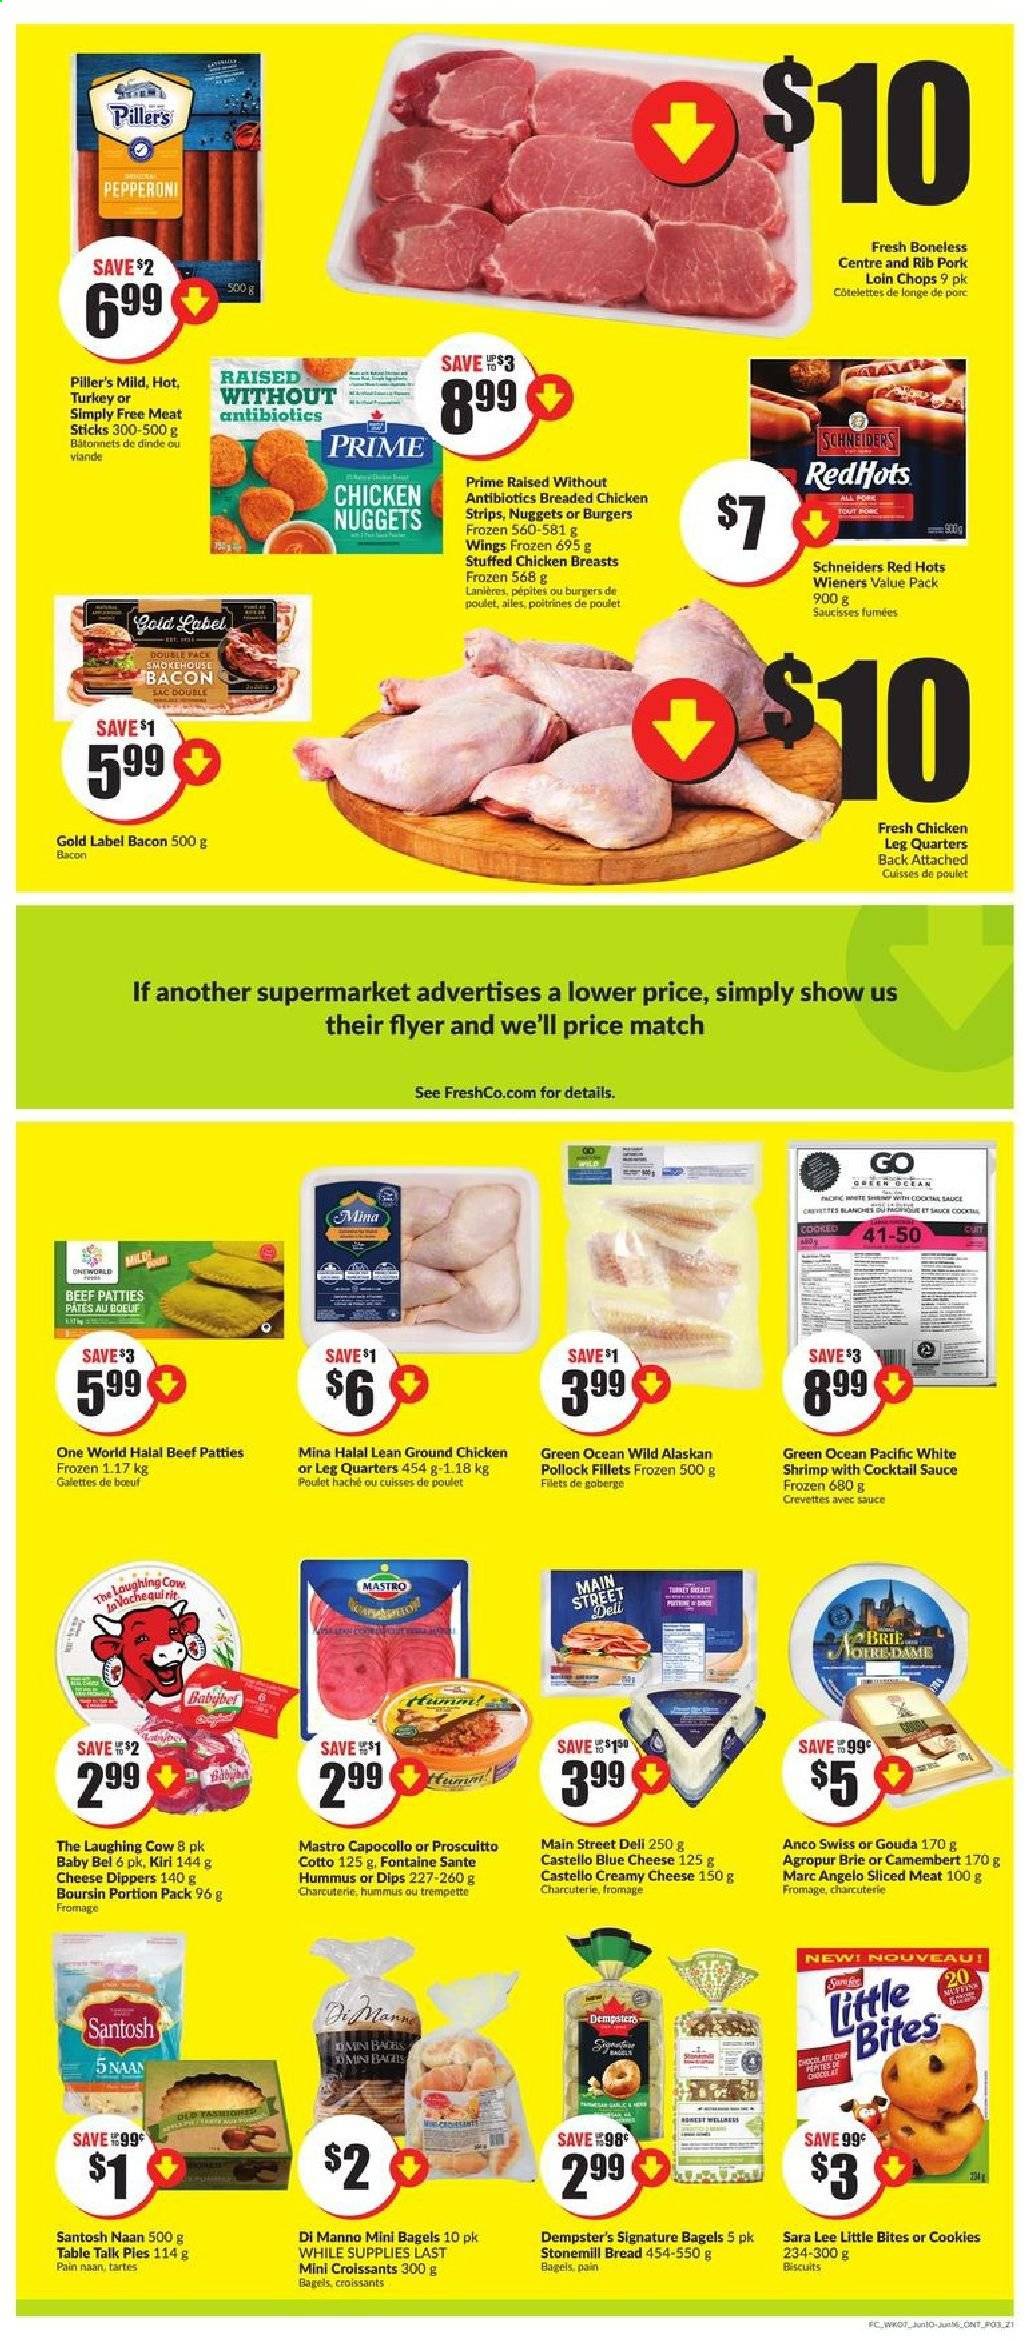 thumbnail - FreshCo. Flyer - June 10, 2021 - June 16, 2021 - Sales products - bagels, bread, croissant, Sara Lee, pollock, shrimps, nuggets, sauce, fried chicken, chicken nuggets, stuffed chicken, bacon, pepperoni, hummus, blue cheese, gouda, cheese, brie, The Laughing Cow, strips, cookies, biscuit, Little Bites, cocktail sauce, ground chicken, chicken legs, chicken, pork chops, pork loin, pork meat. Page 3.